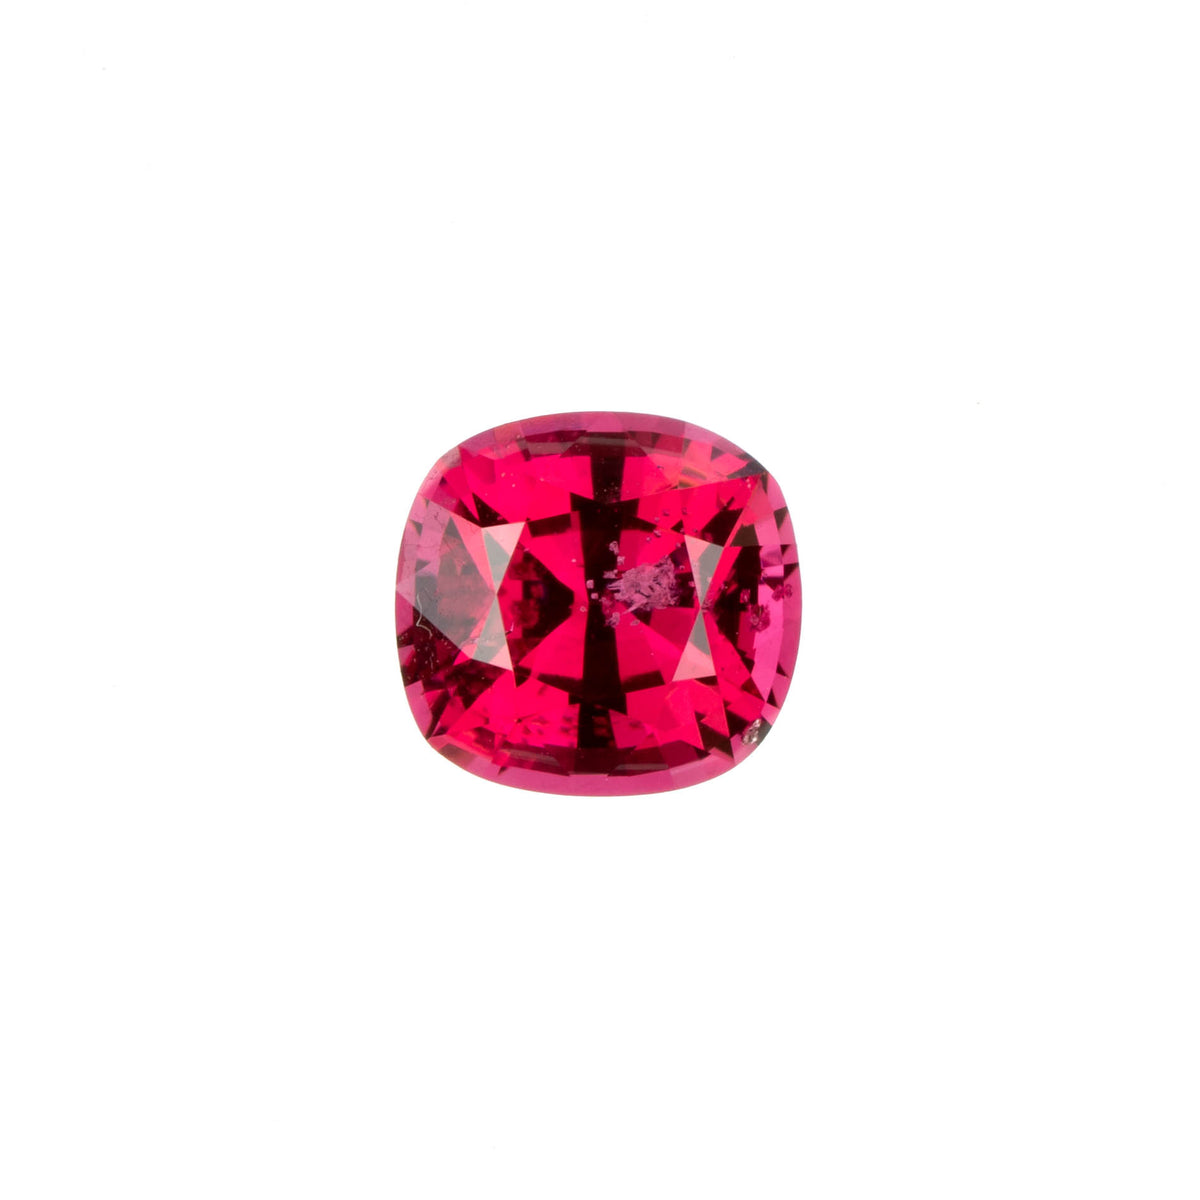 0.66ct Natural Vivid Red Spinel